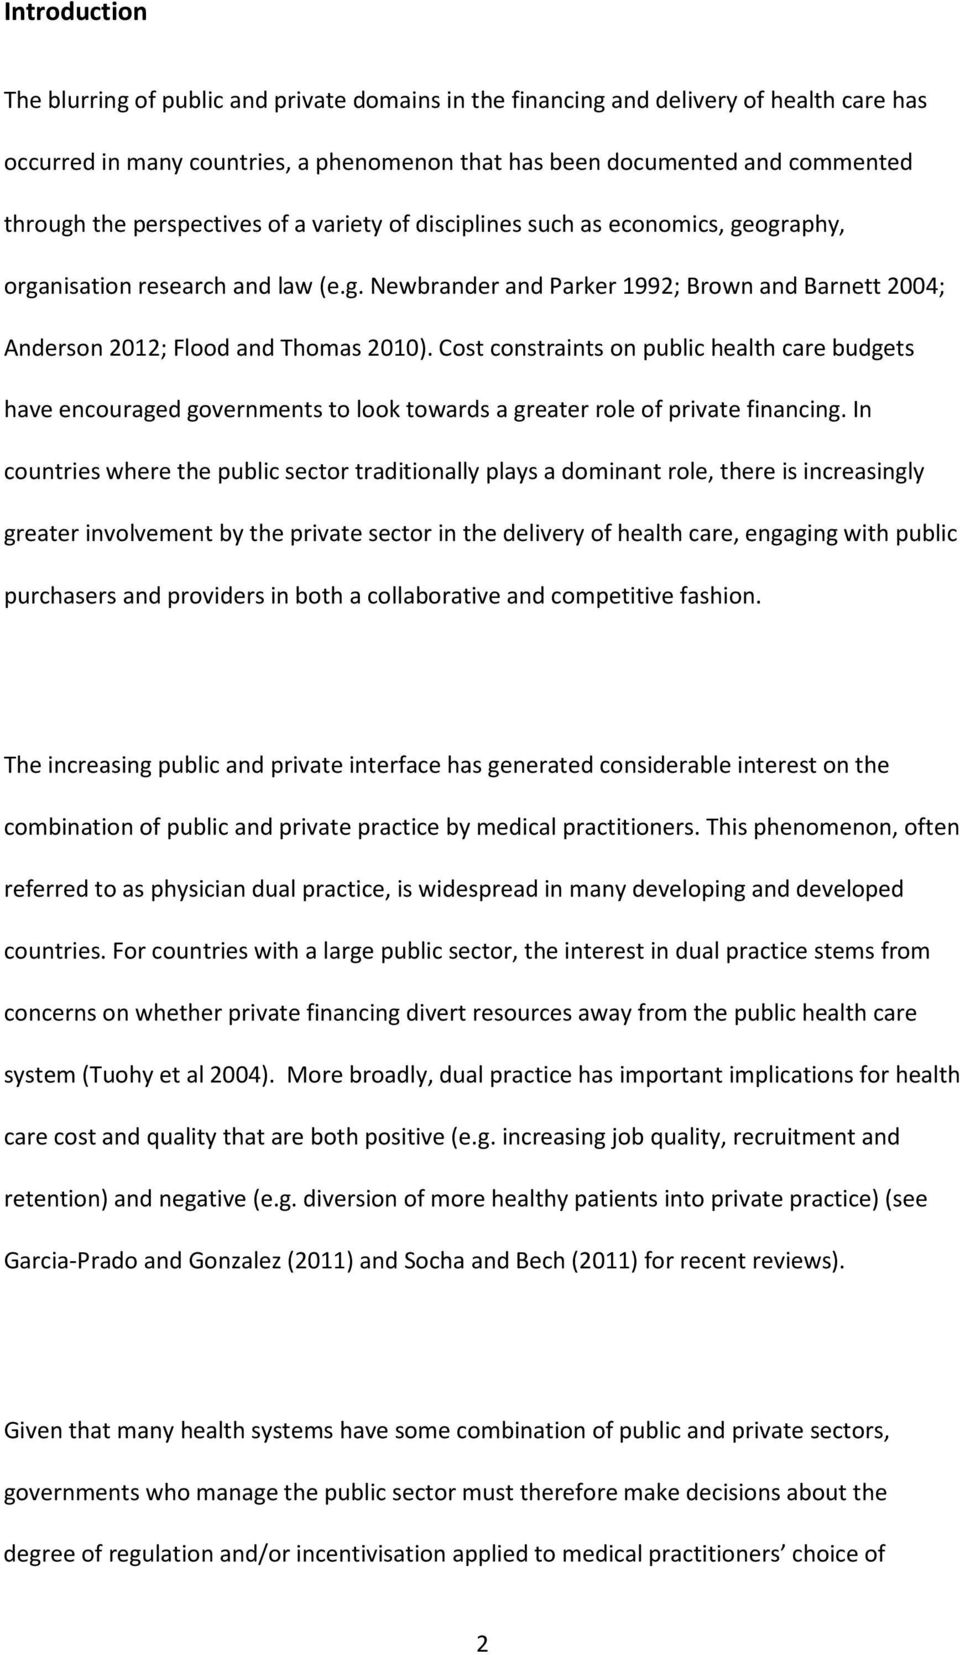 Cost constraints on public health care budgets have encouraged governments to look towards a greater role of private financing.